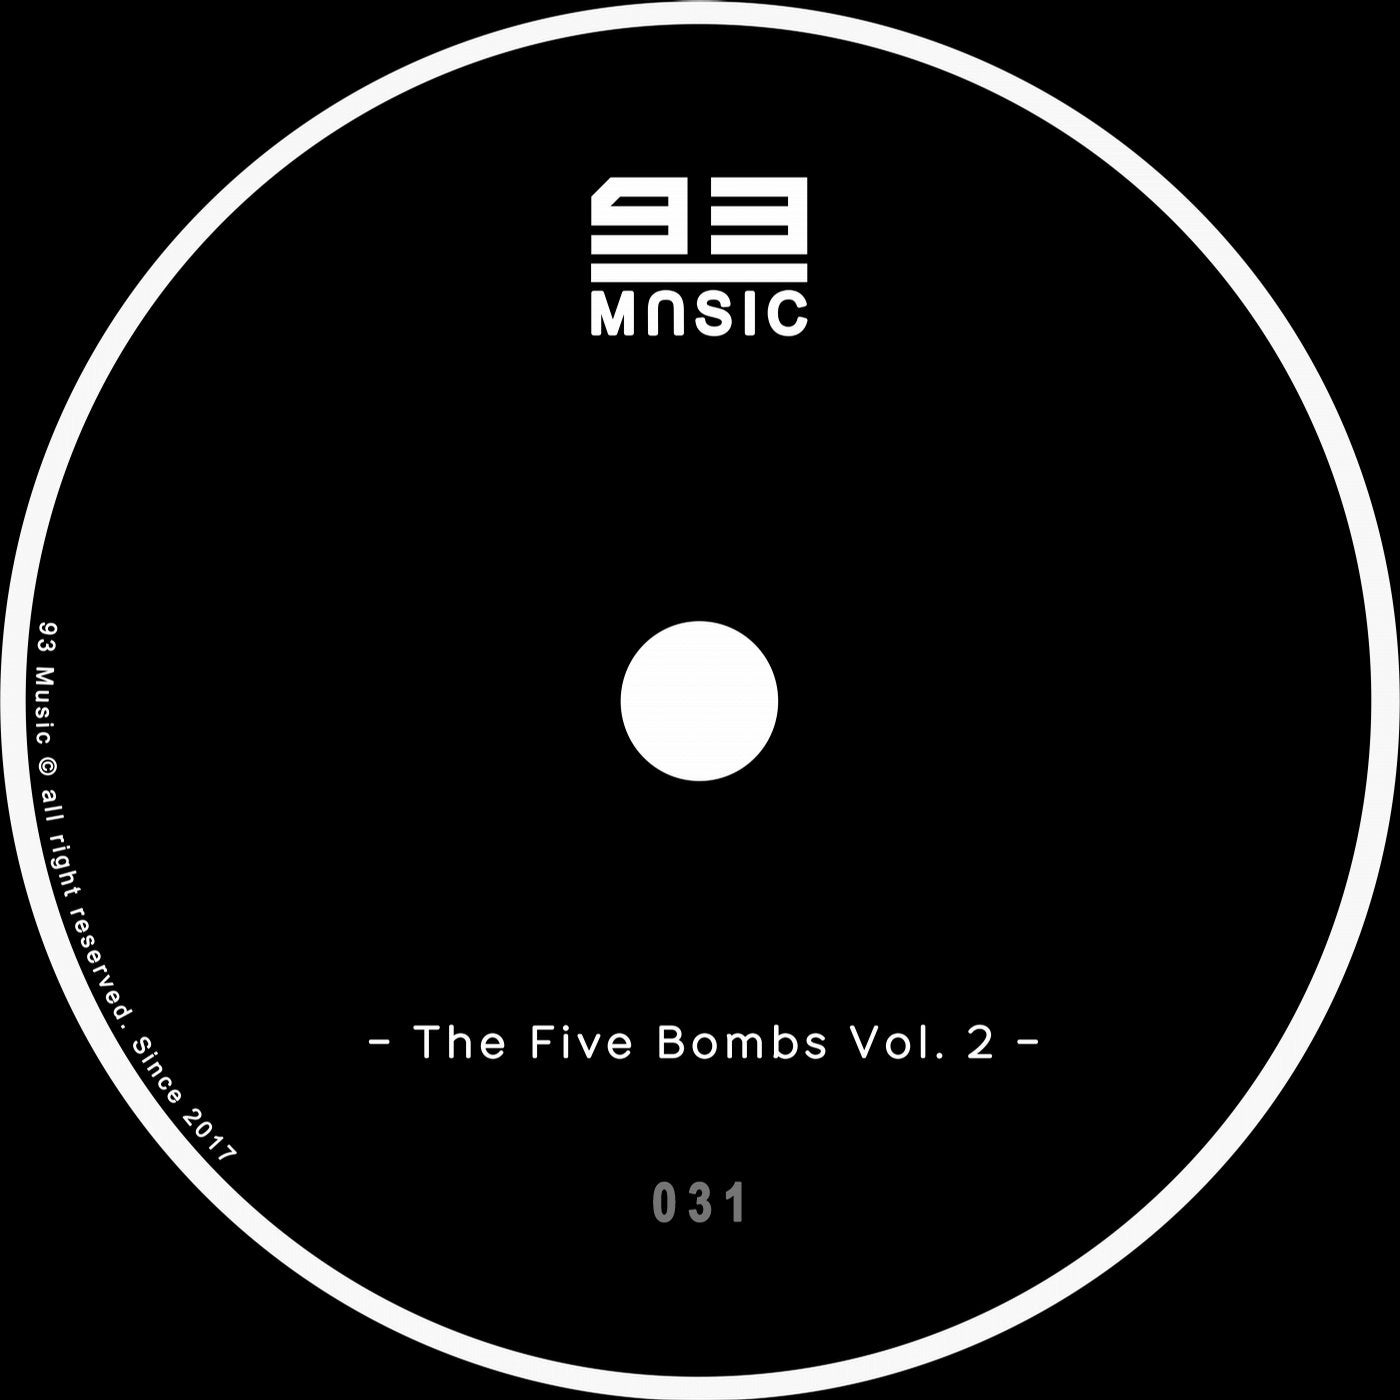 The Five Bombs Vol. 2